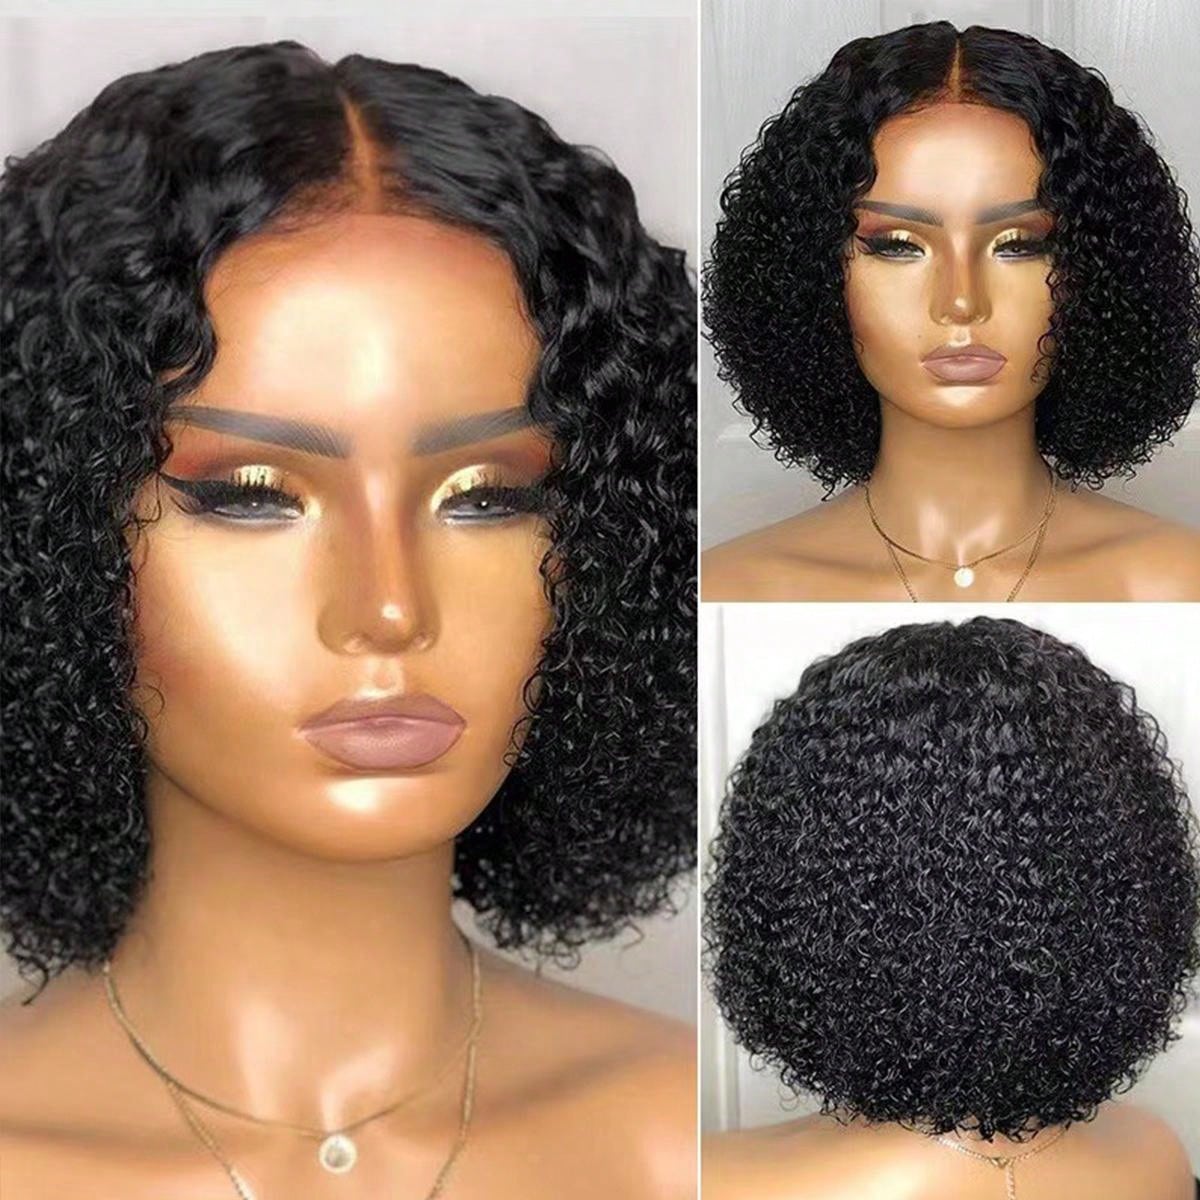 Afro Short Bob Curly Wig - Synthetic Hair Wig With Middle Part For Women - Perfect For Daily Wear, Parties, Cosplay, And Halloween Costumes